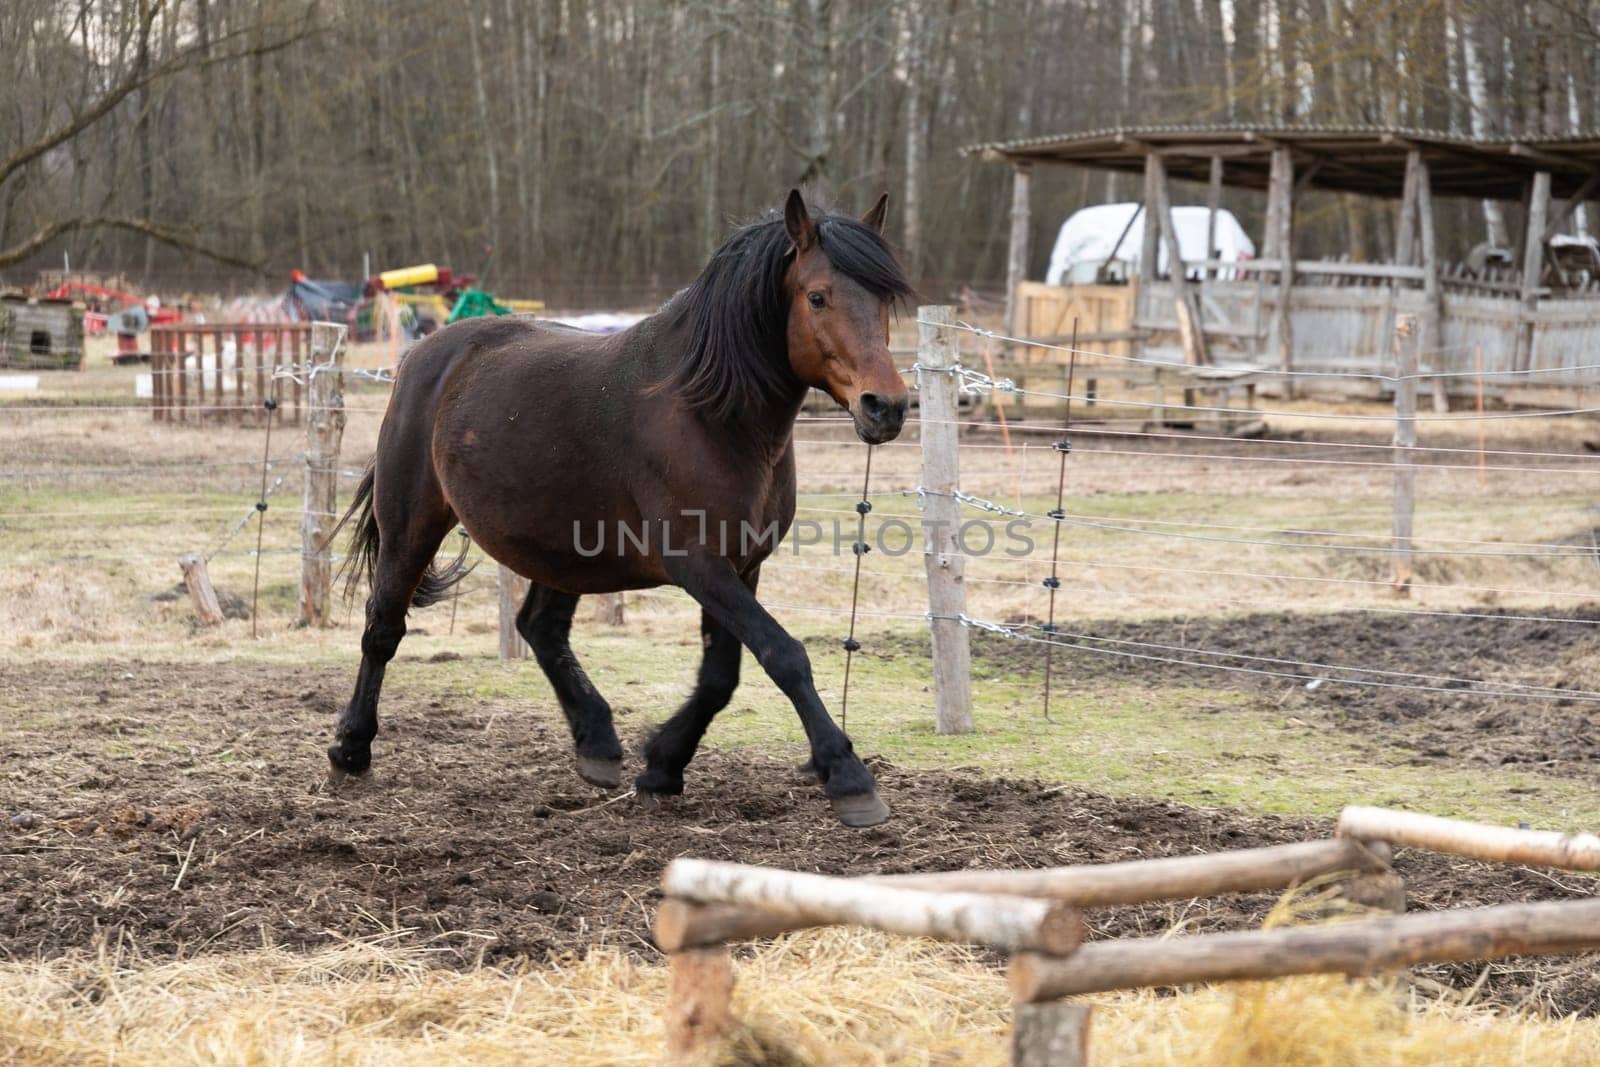 A brown horse with black mane and tail is trotting inside a fenced area. The horses hooves are gracefully hitting the ground as it moves in a rhythmic motion.